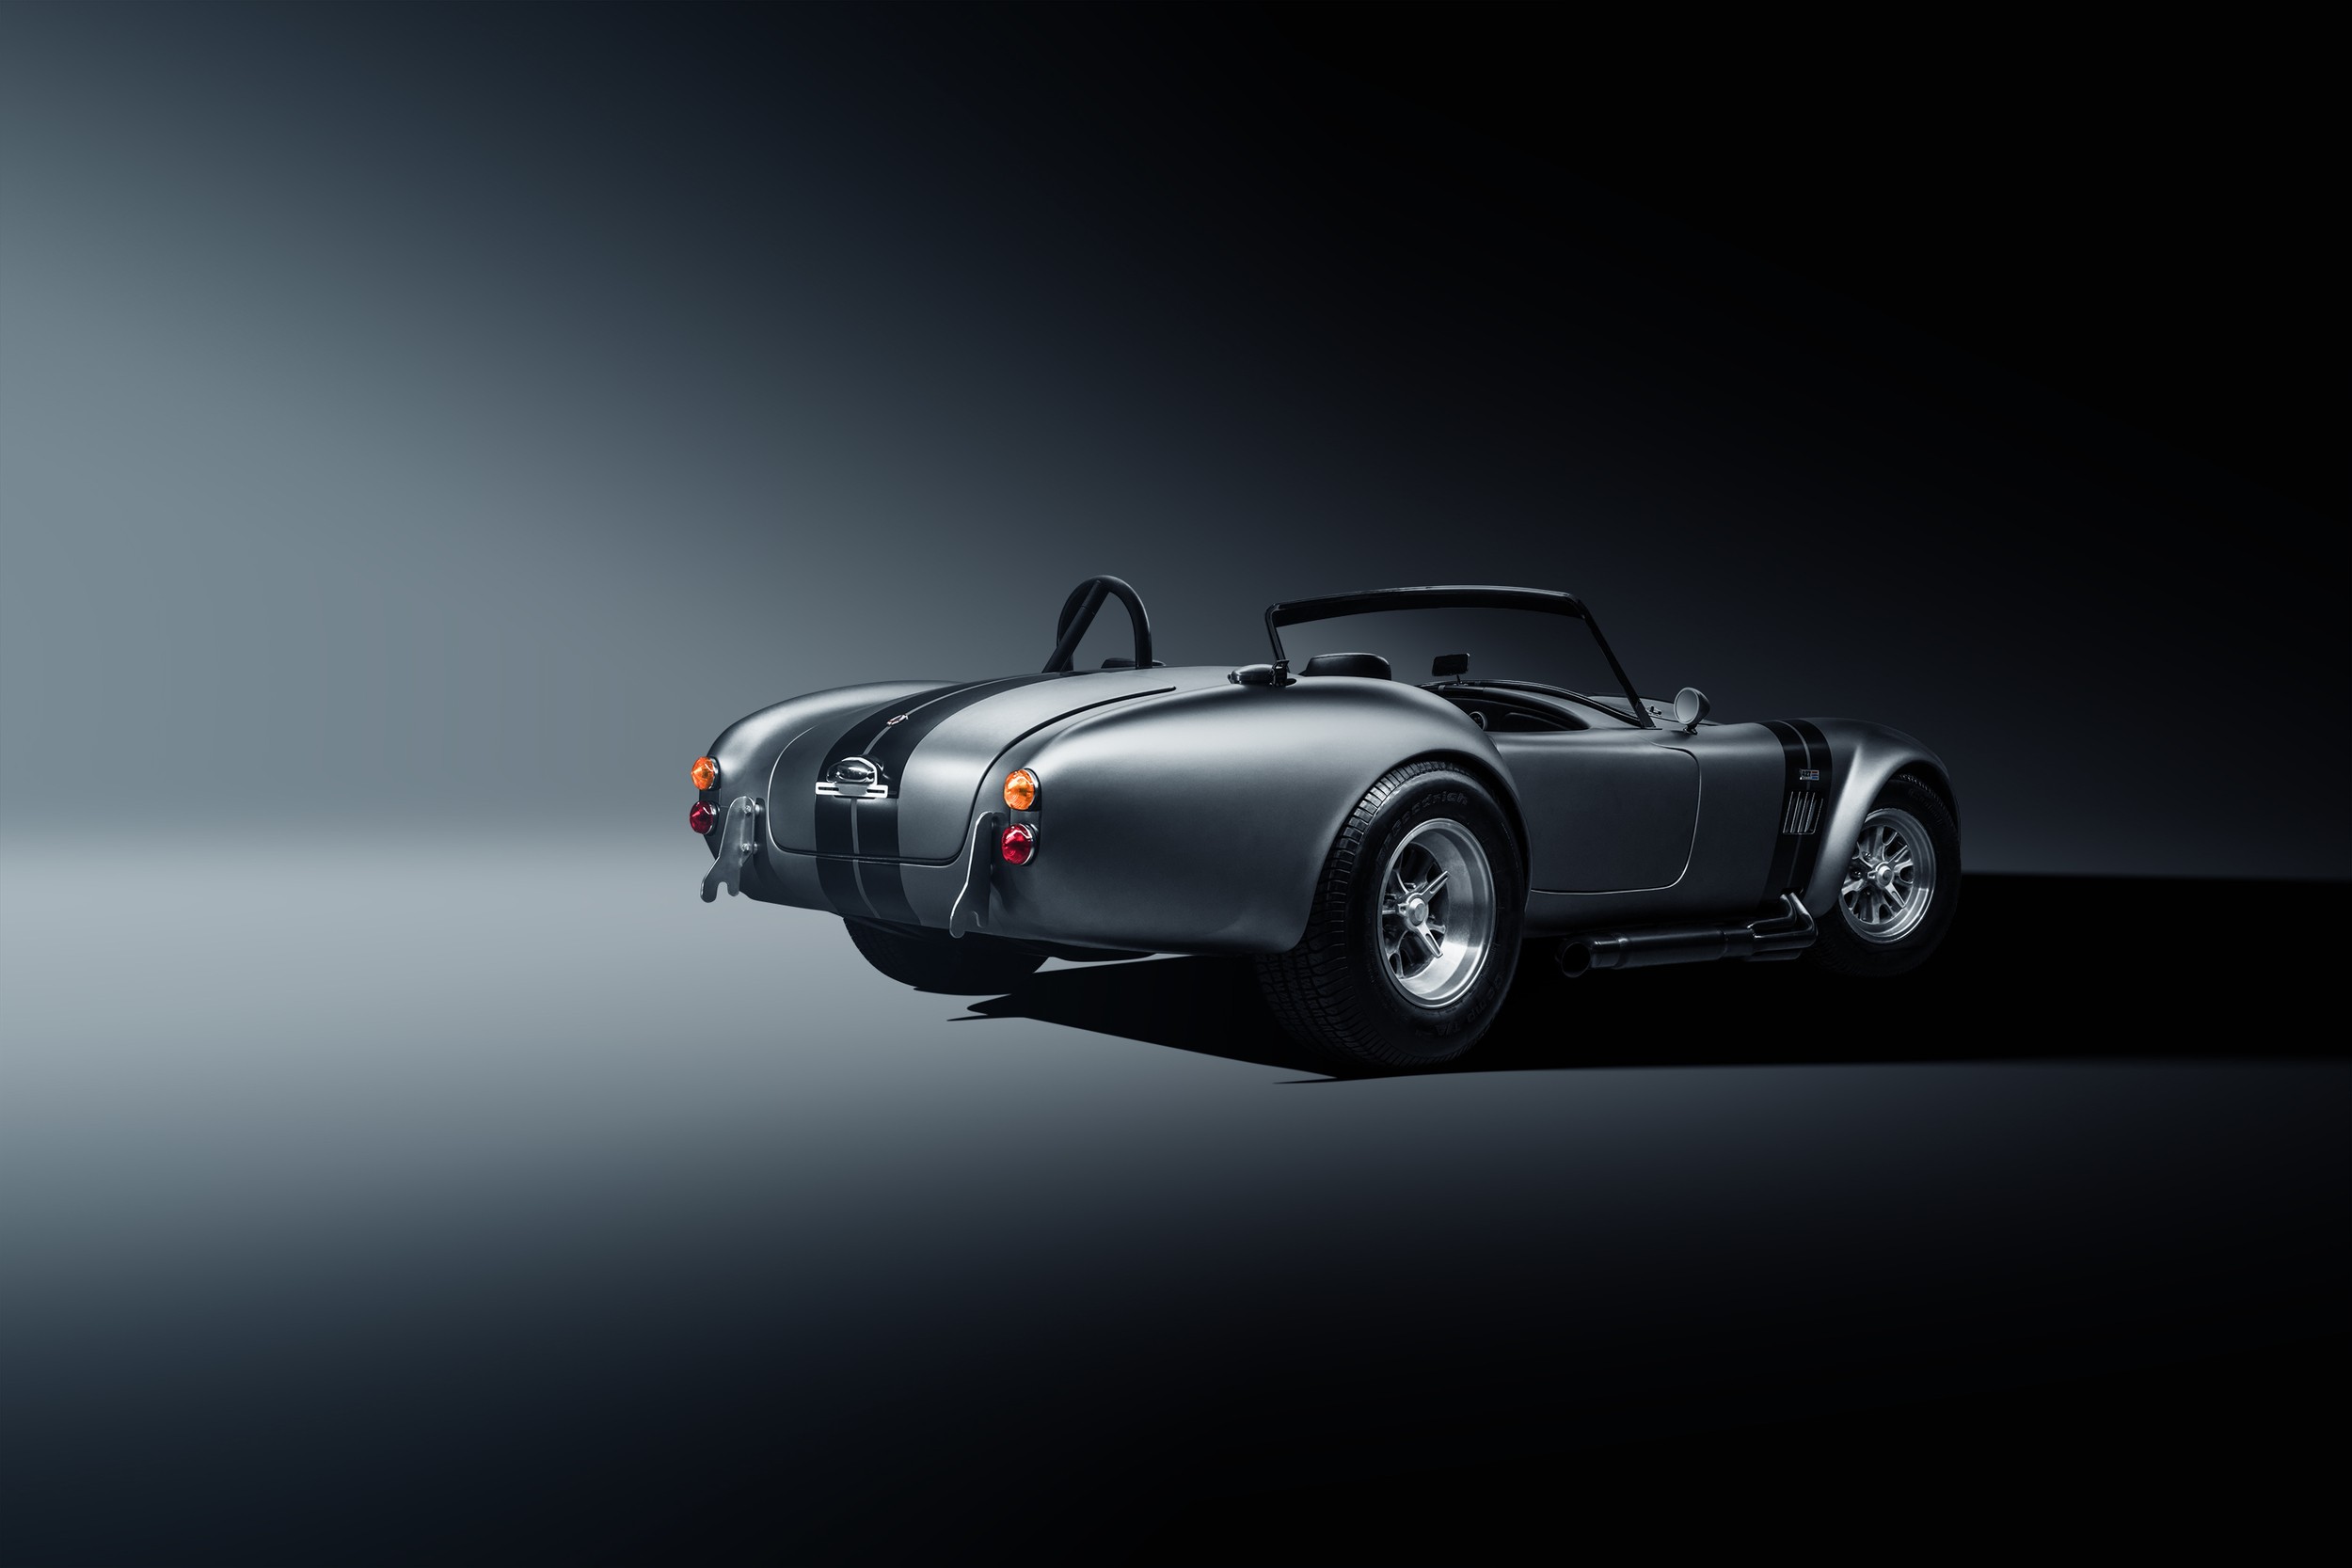  Shelby Cobra HQ Background Images